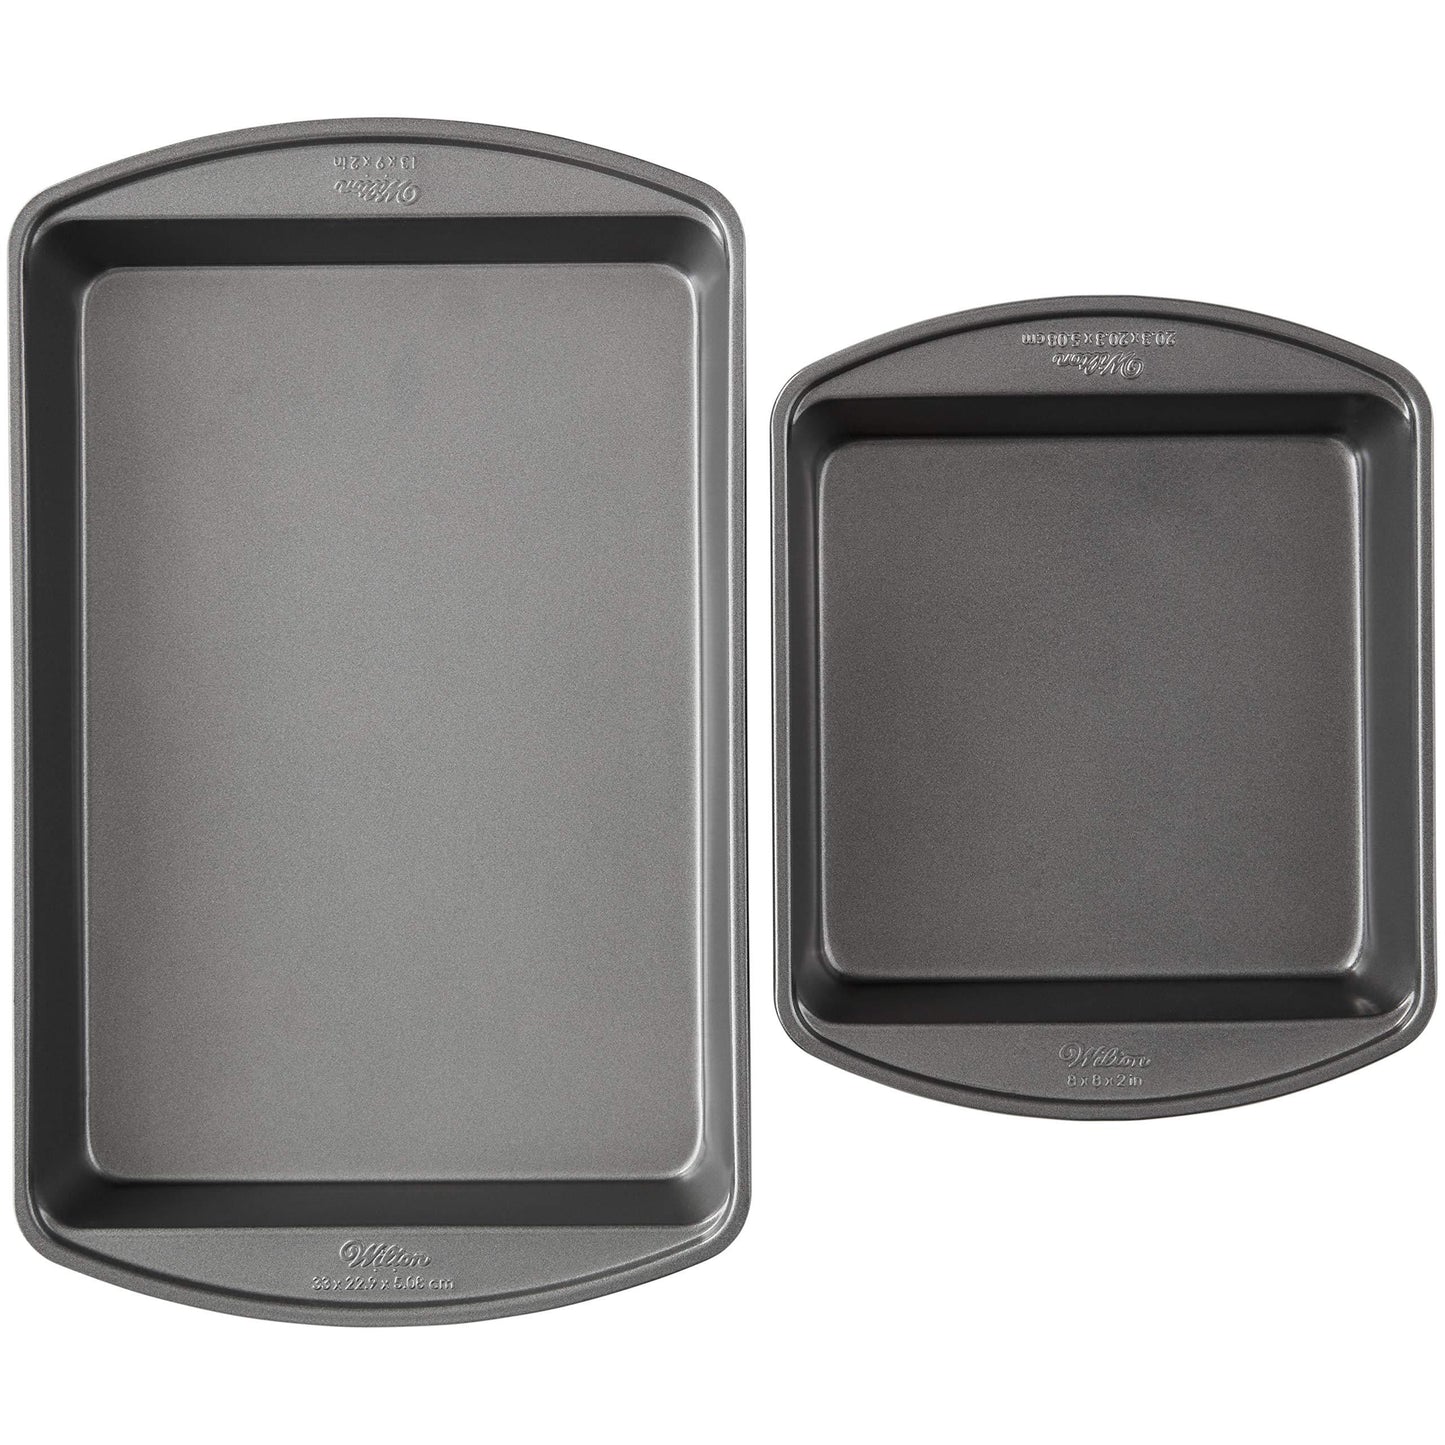 Wilton Perfect Results Premium Non-Stick Oblong and Square Cake Pan Set, 2-Piece - CookCave